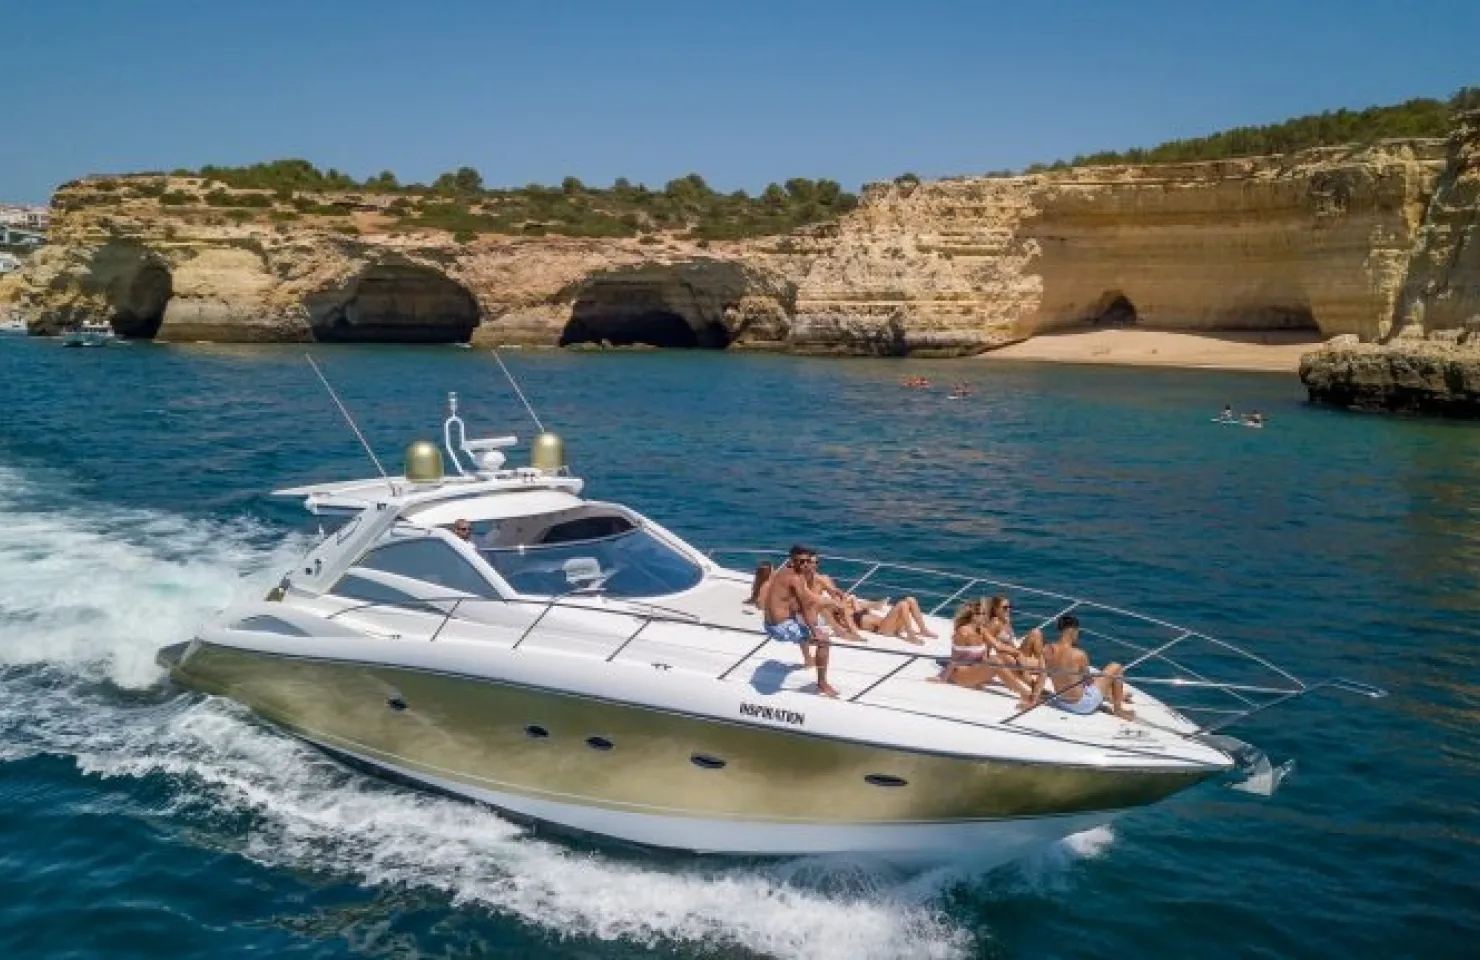 Easy Dream Charters - Inspiration - Rent a boat in Vilamoura